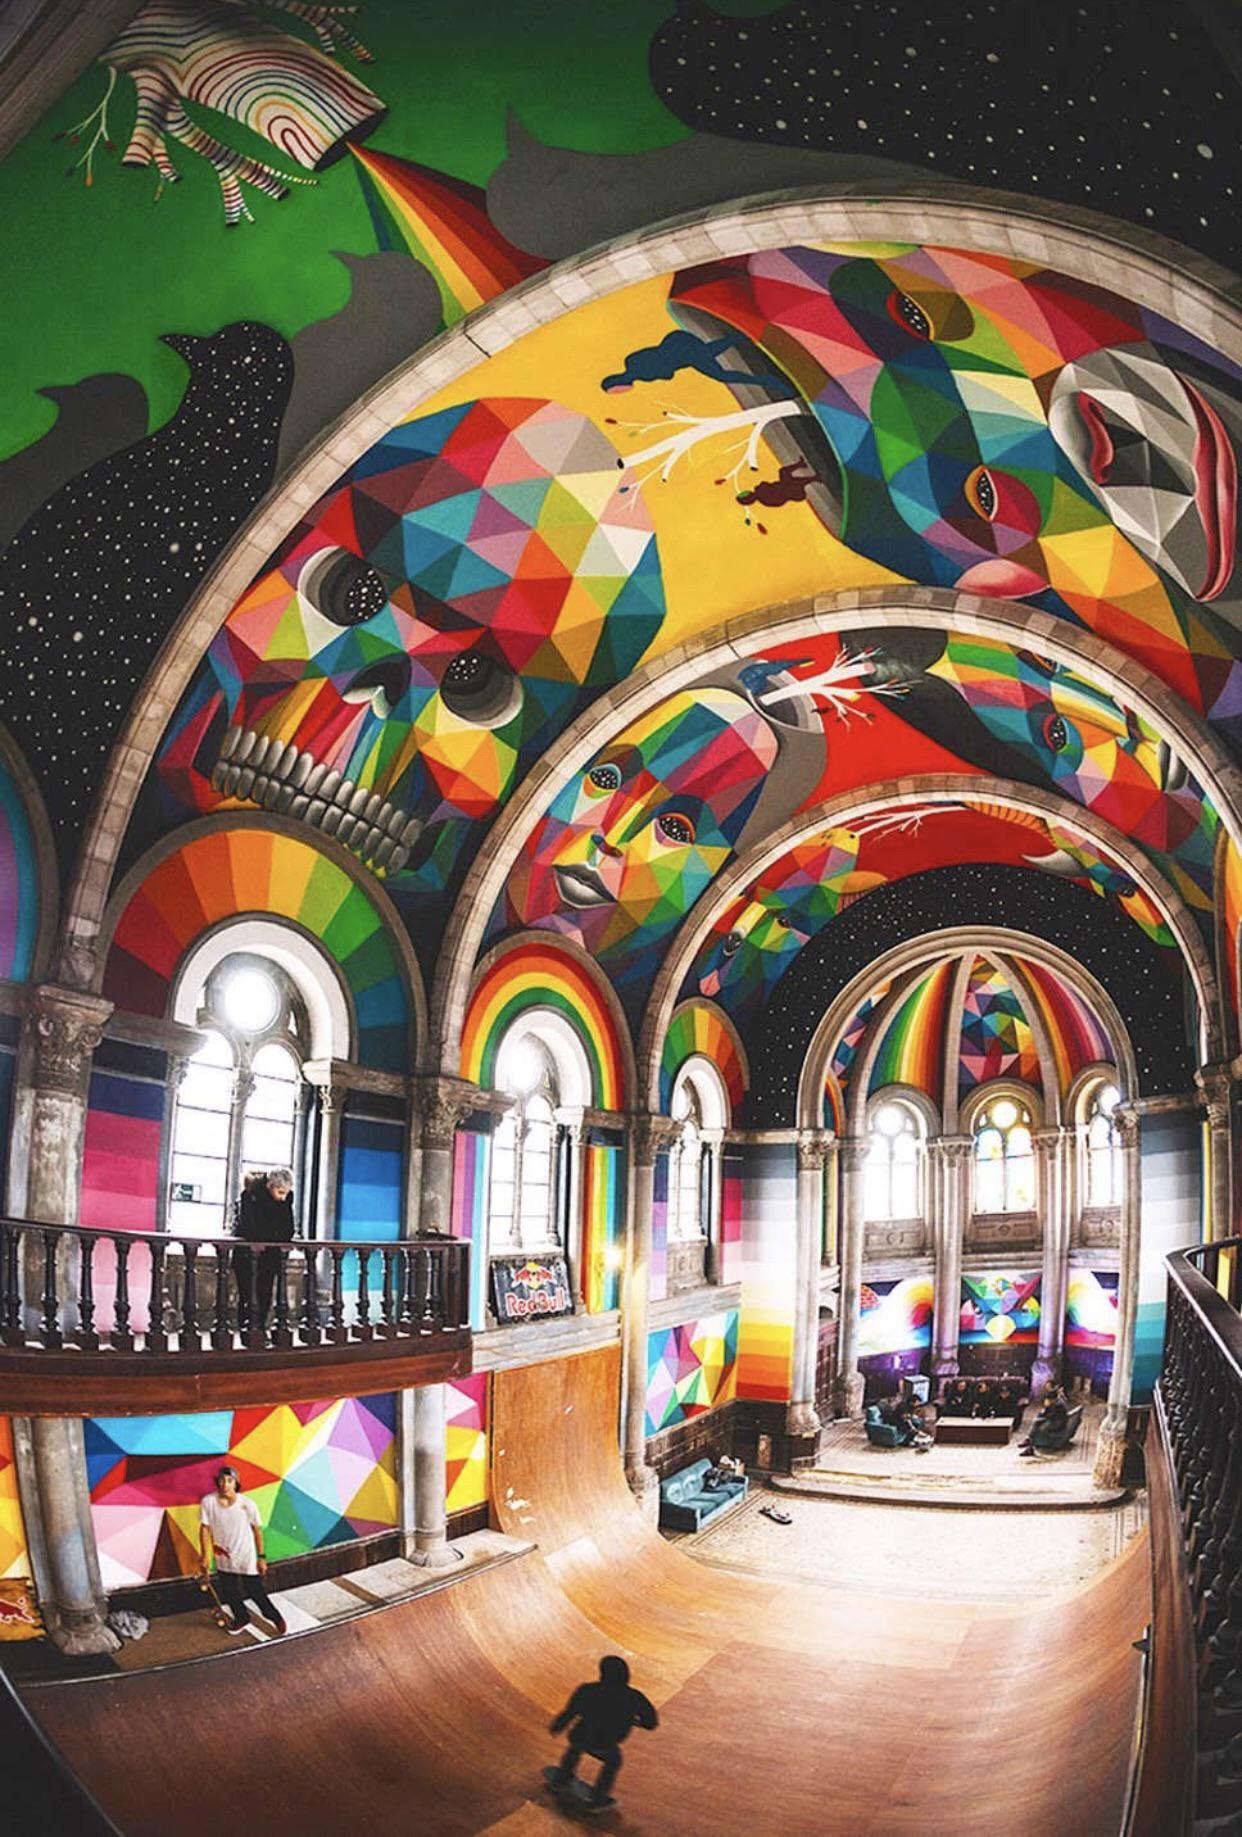 A 97 year old Spanish church repurposed into a skatepark. Righteous.